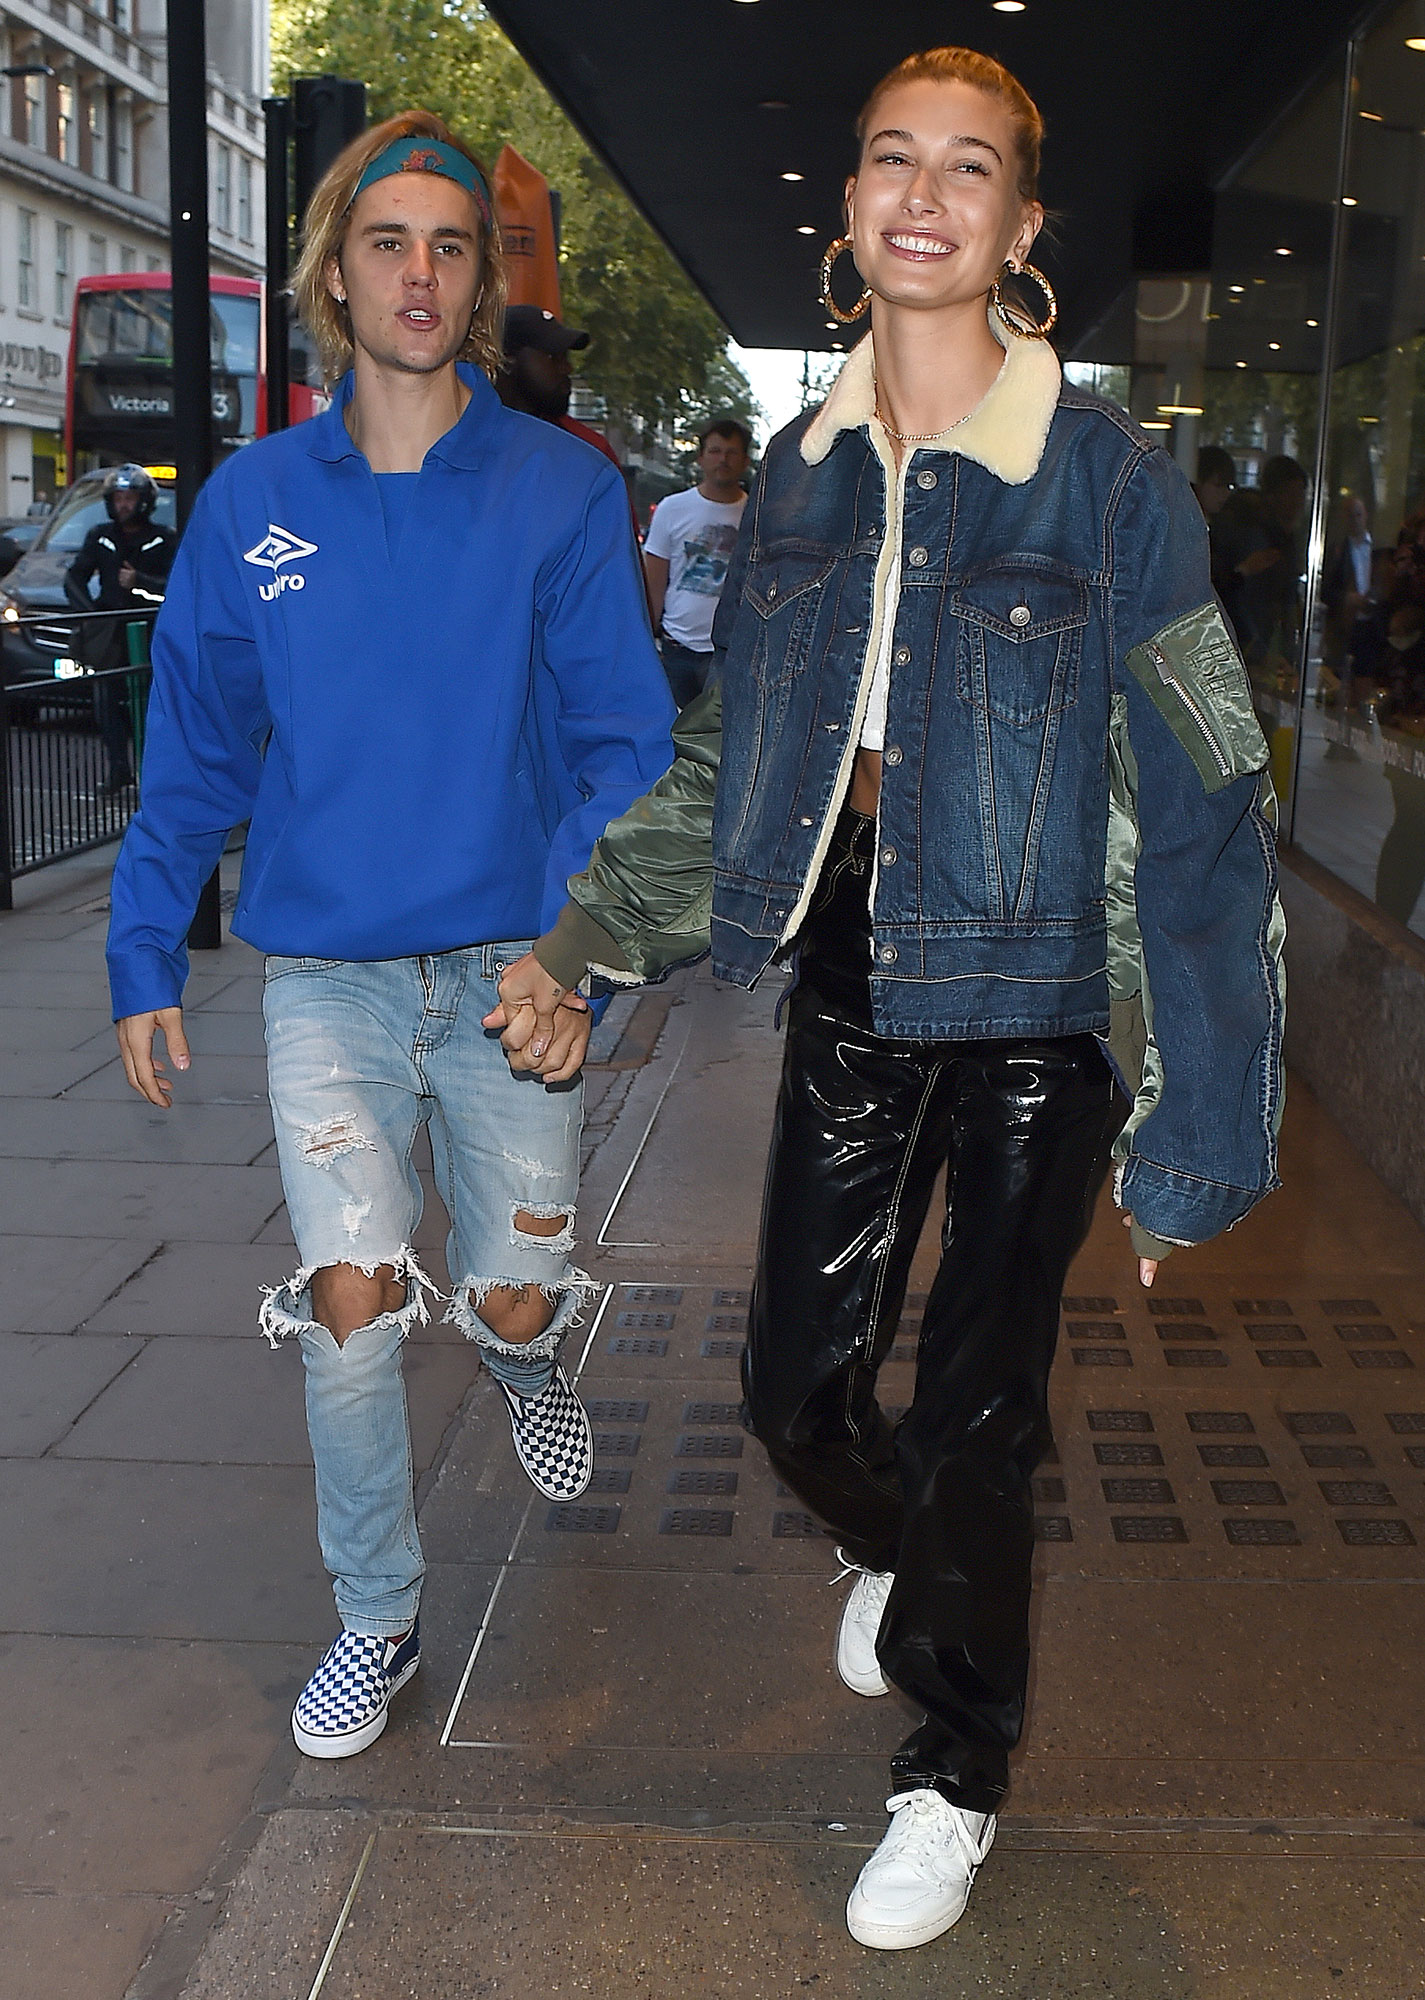 Justin Bieber Says He Wants Babies With Hailey Baldwin In